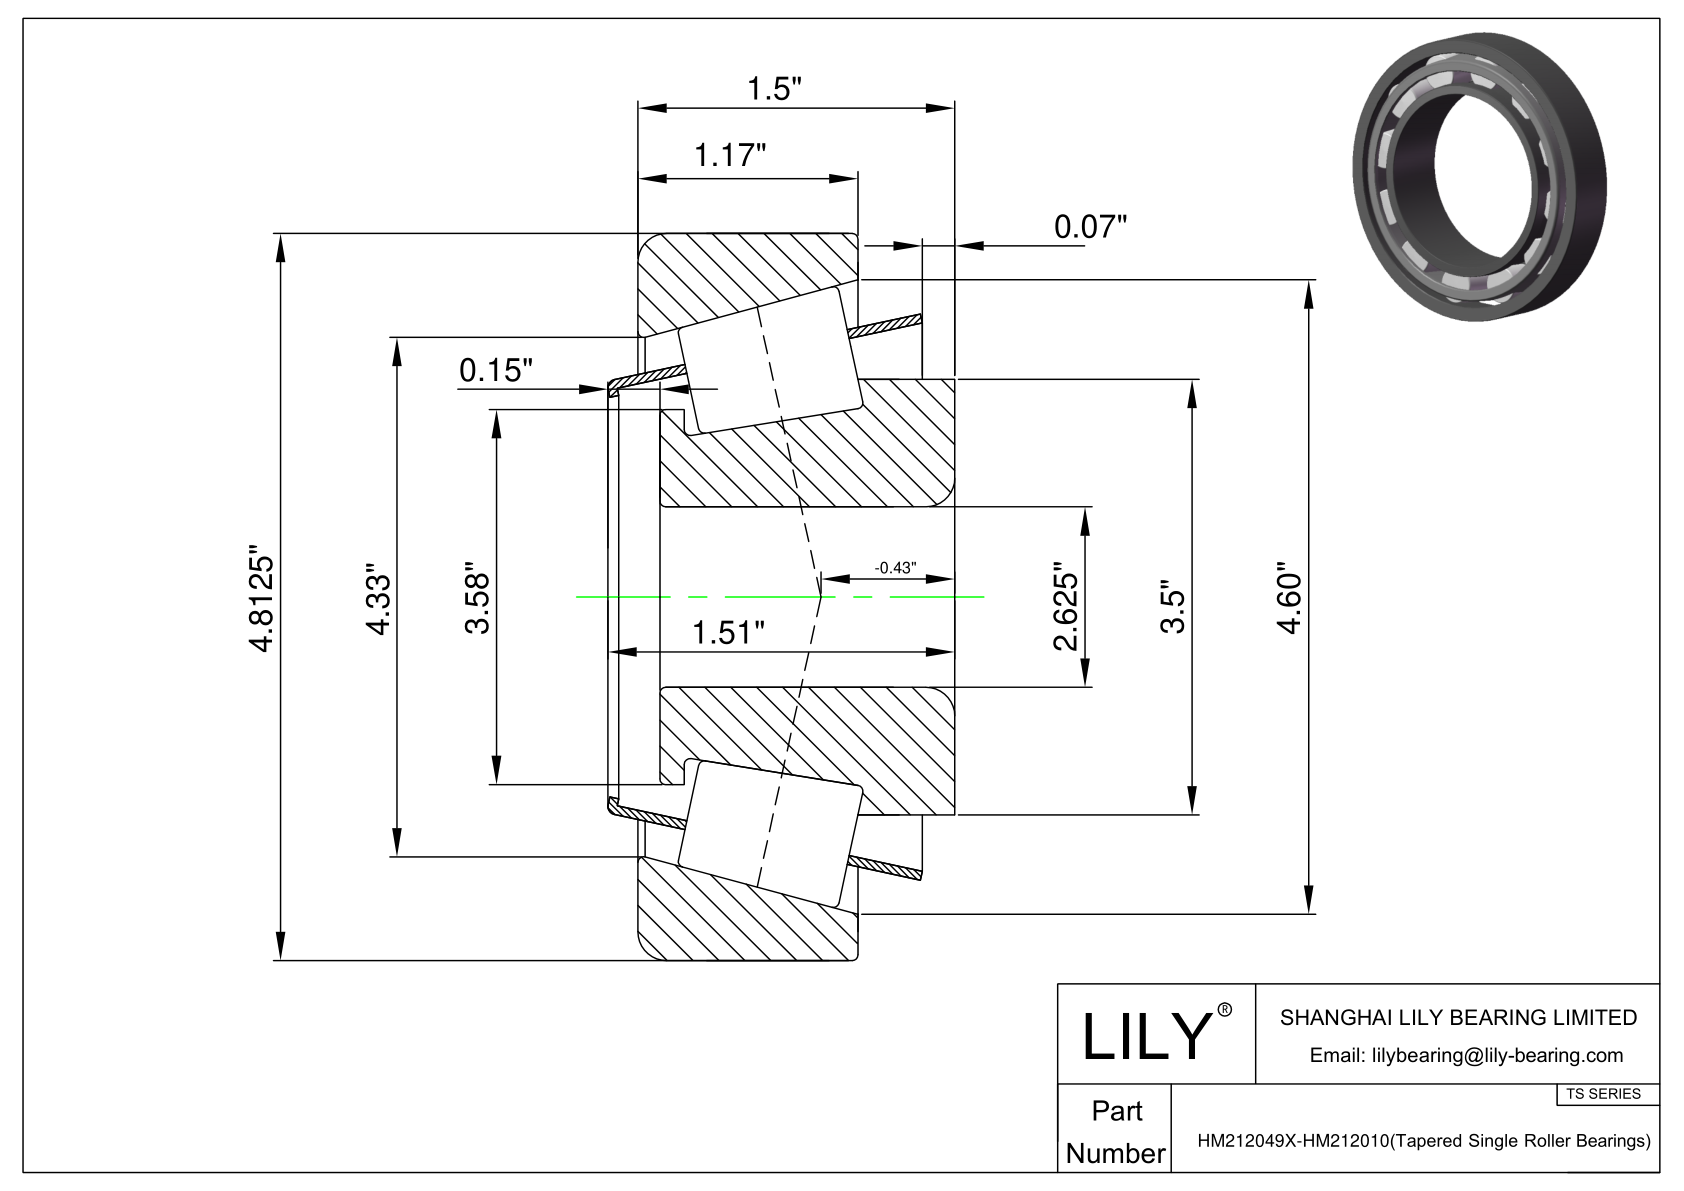 HM212049X-HM212010 TS (Tapered Single Roller Bearings) (Imperial) cad drawing